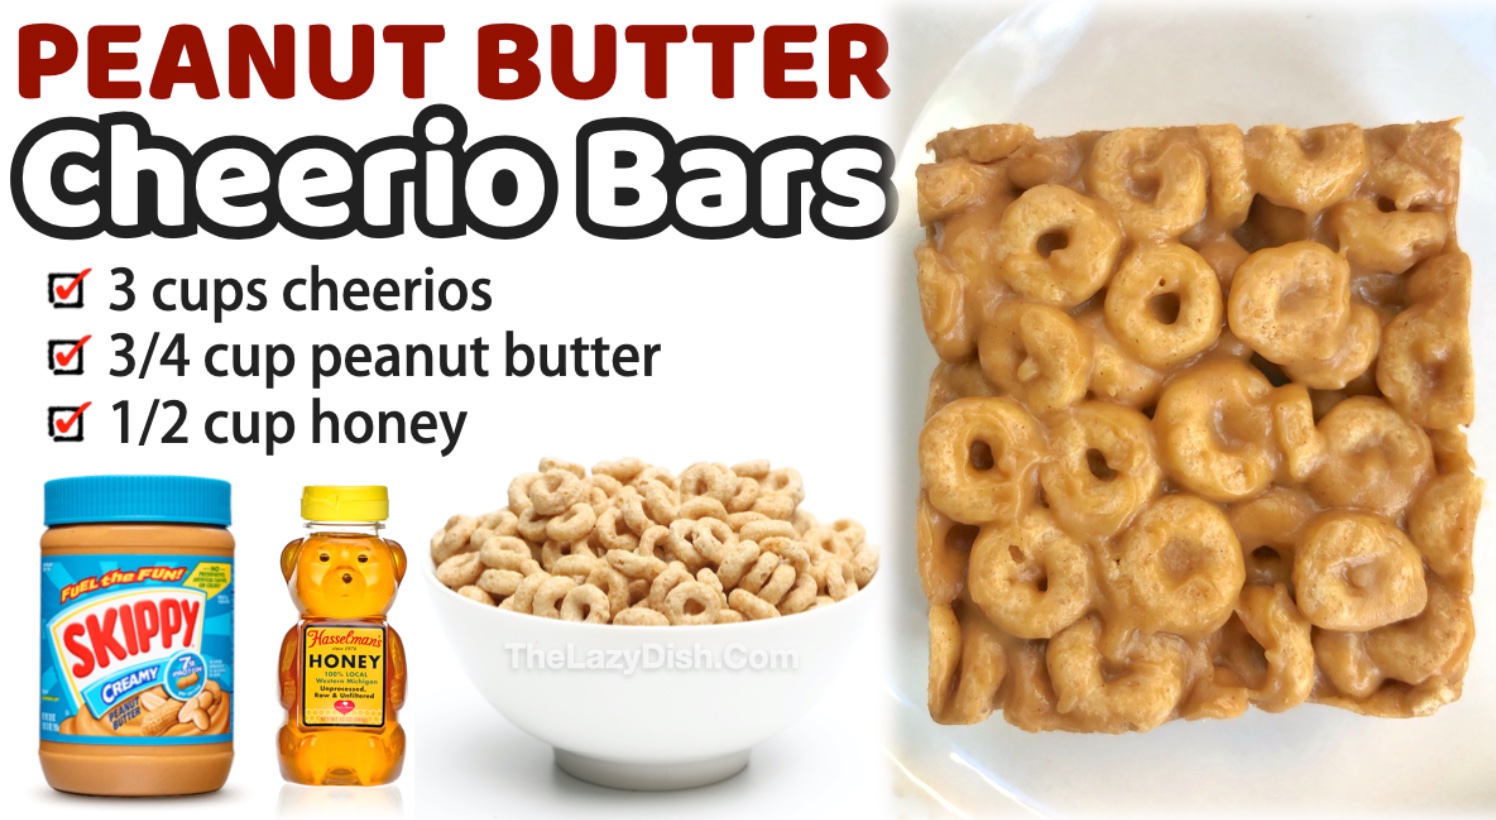 3 Ingredient Peanut Butter Cheerio Bars - The Lazy Dish